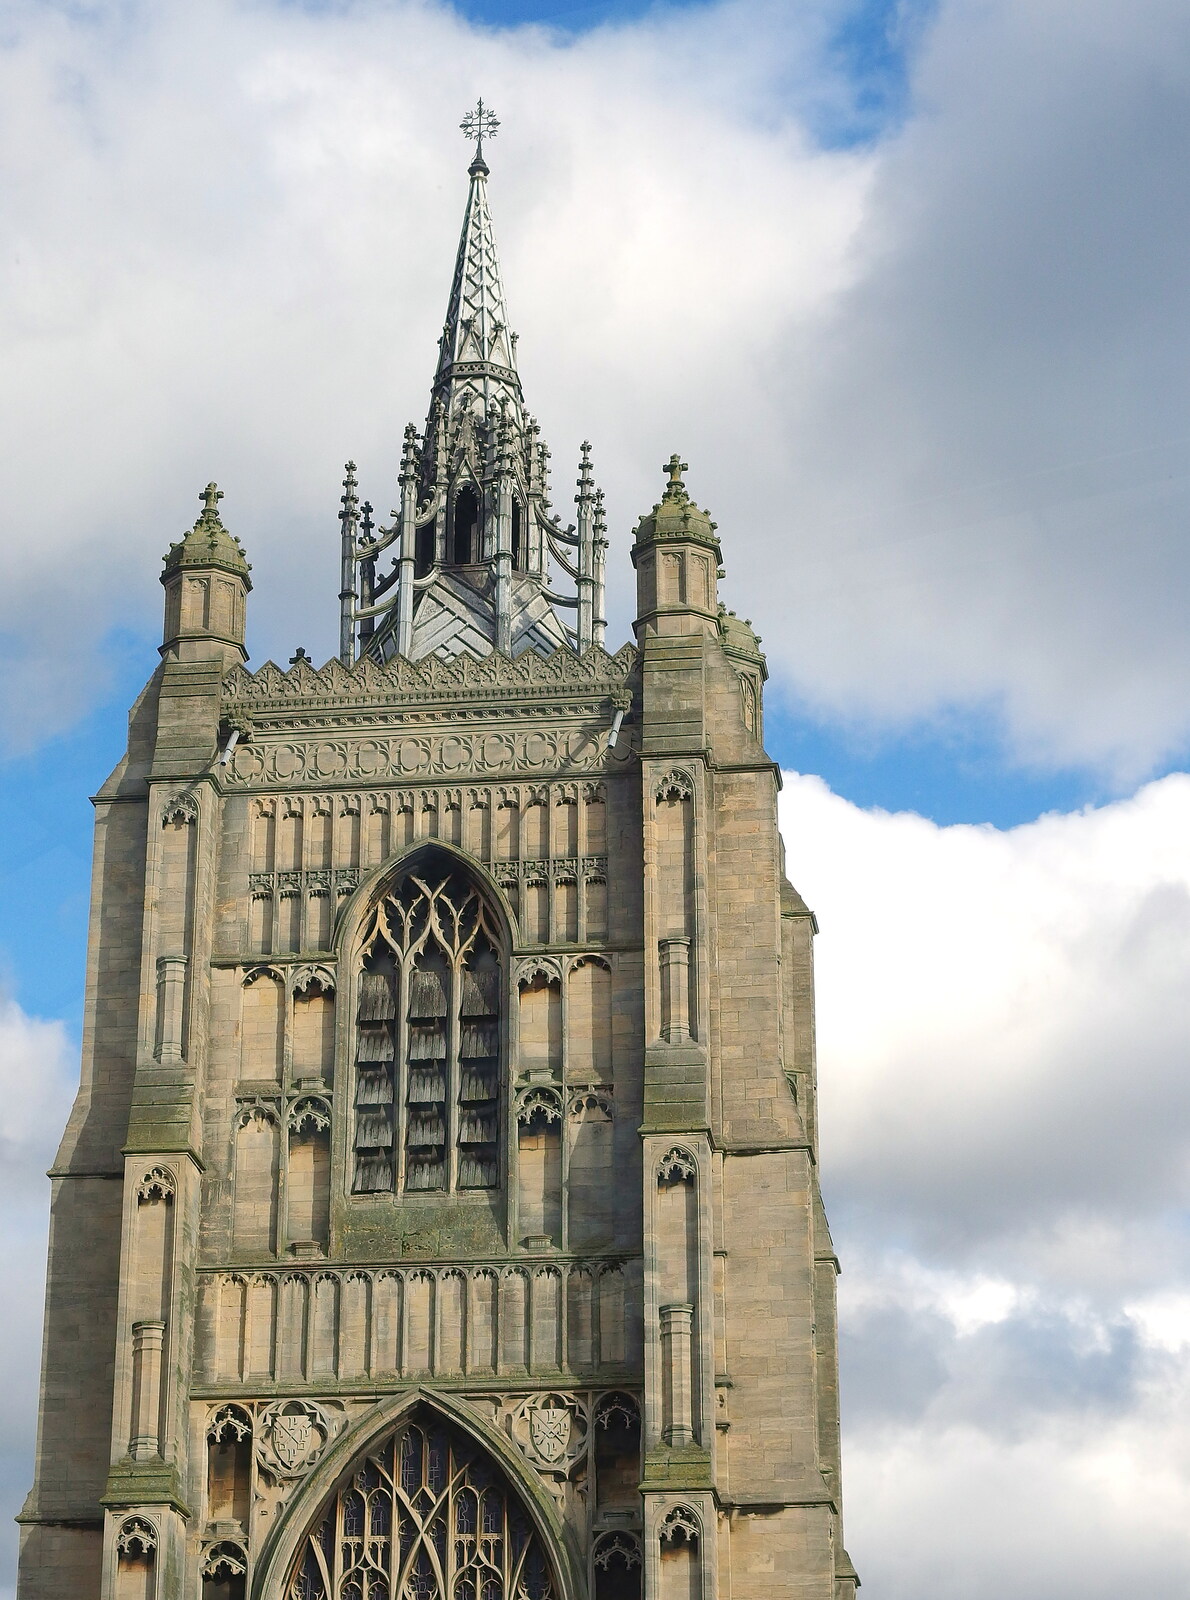 The spire of St. Peter Mancroft from A Dragoney Sort of Day, Norwich, Norfolk - 15th February 2014